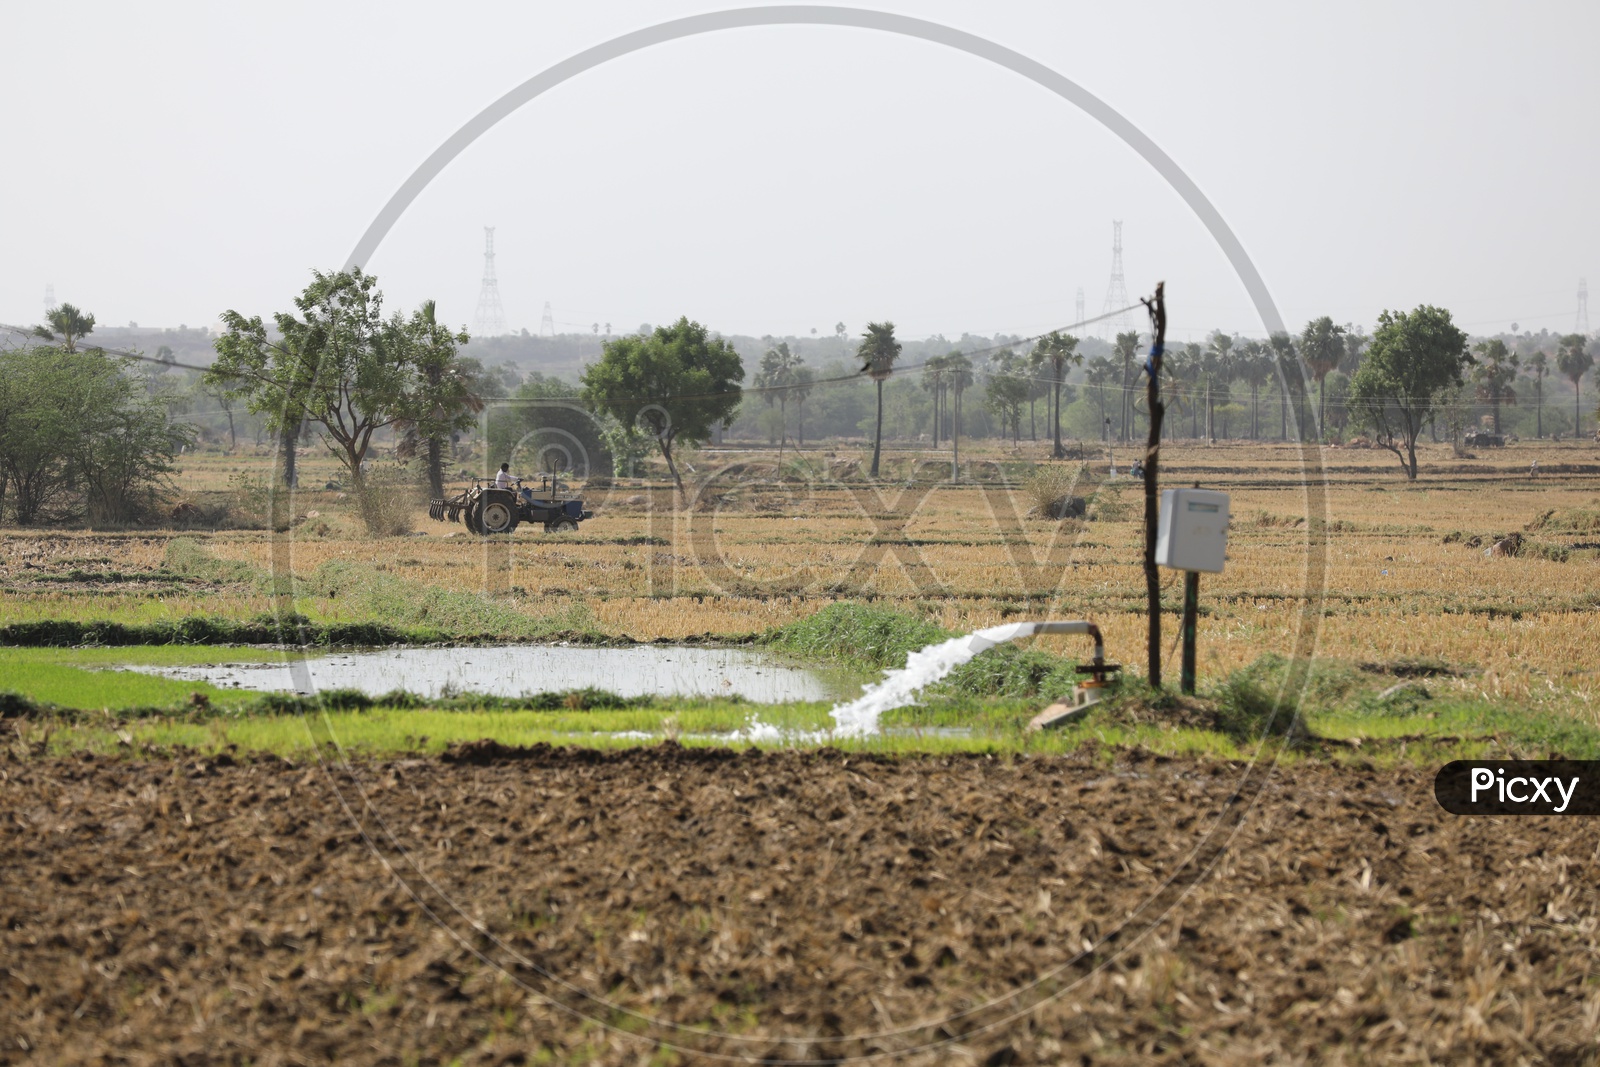 Motor Pumping Of Water To Farm Lands Or Agricultural Lands in Rural villages